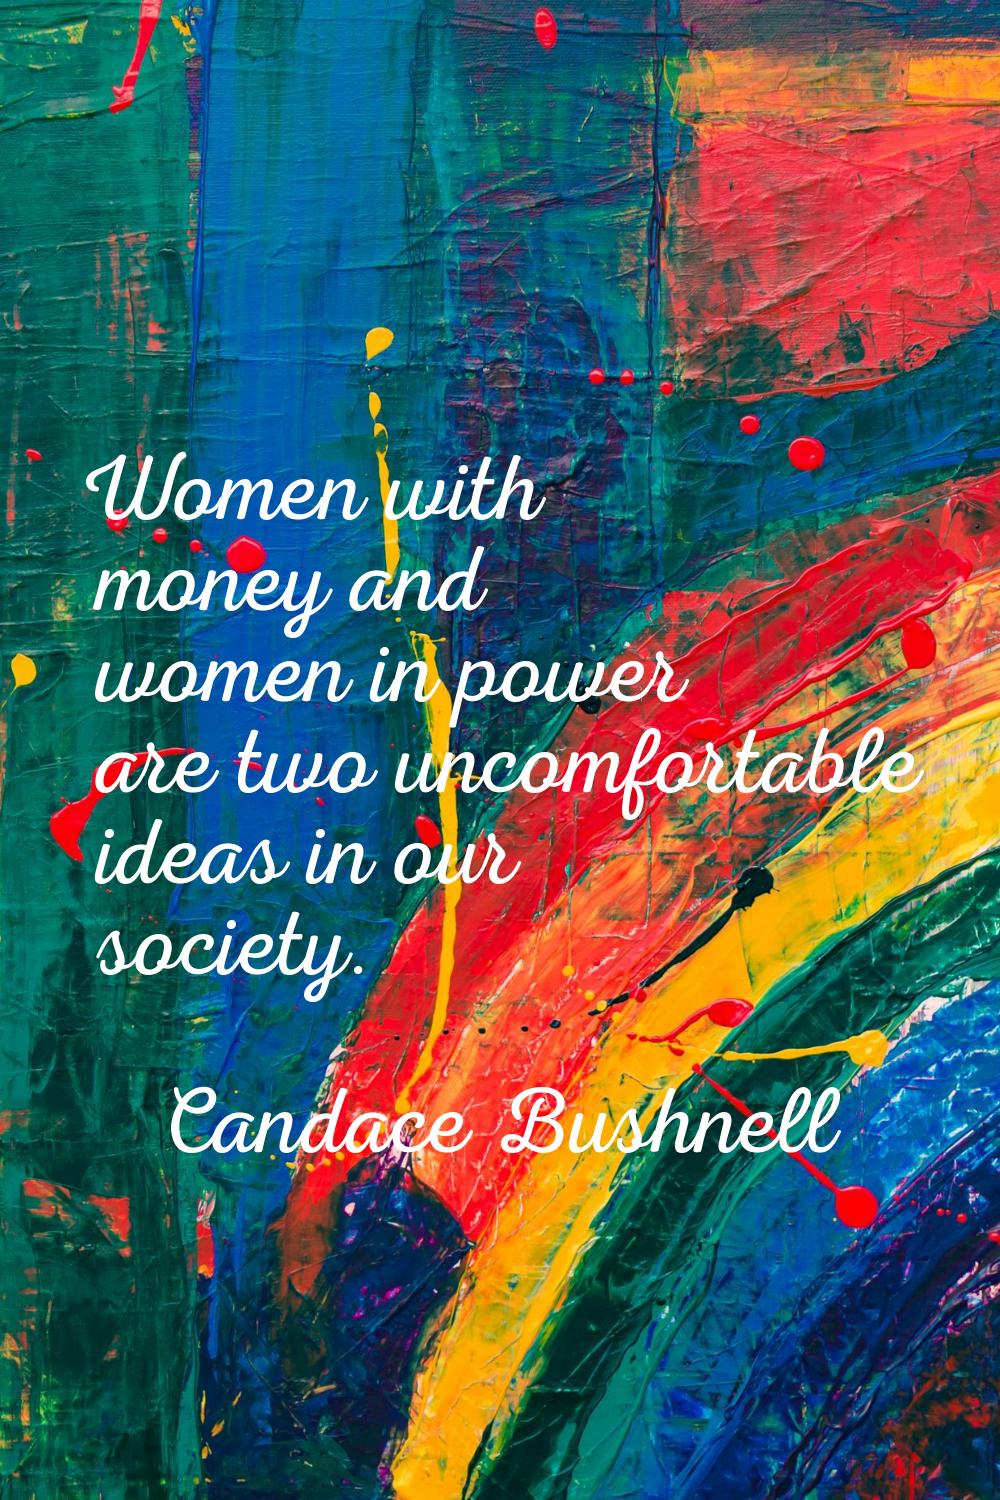 Women with money and women in power are two uncomfortable ideas in our society.